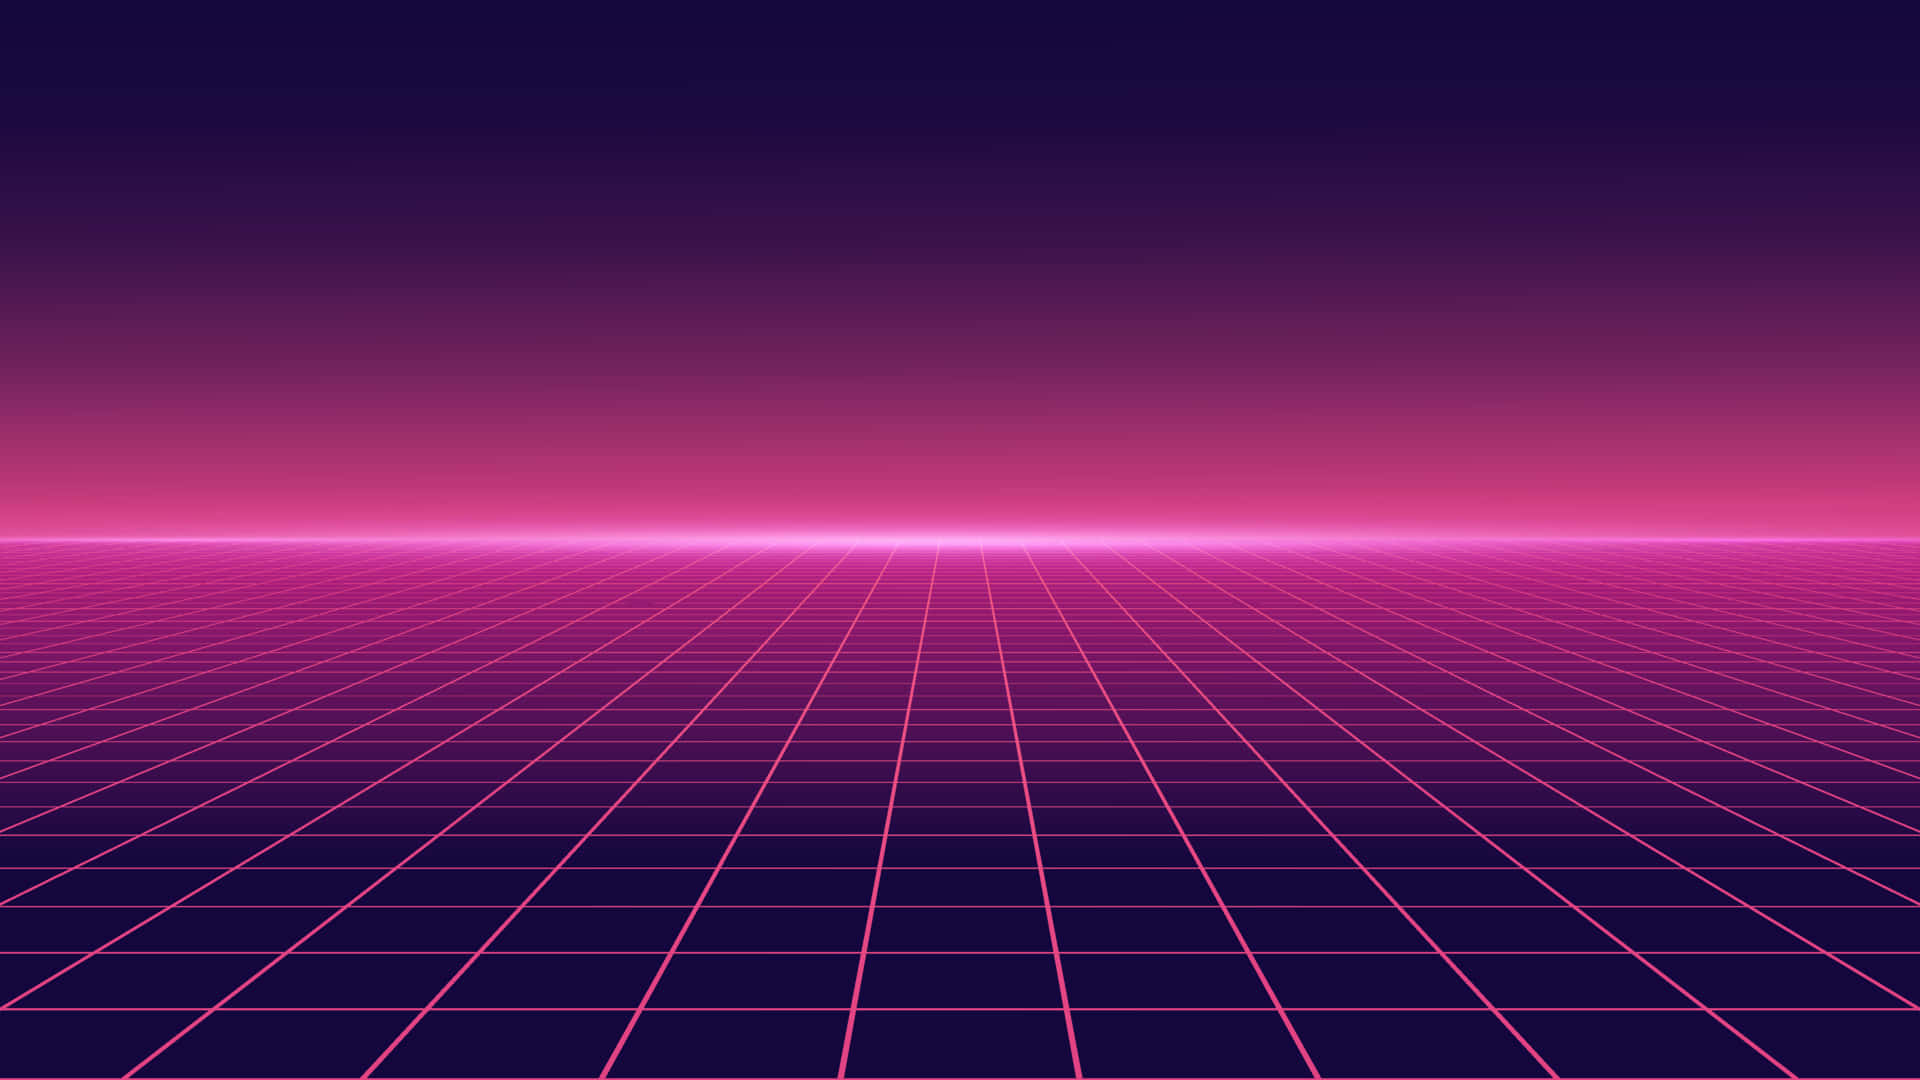 Experience the Vibrant Colors of the 80s with this Retro Background